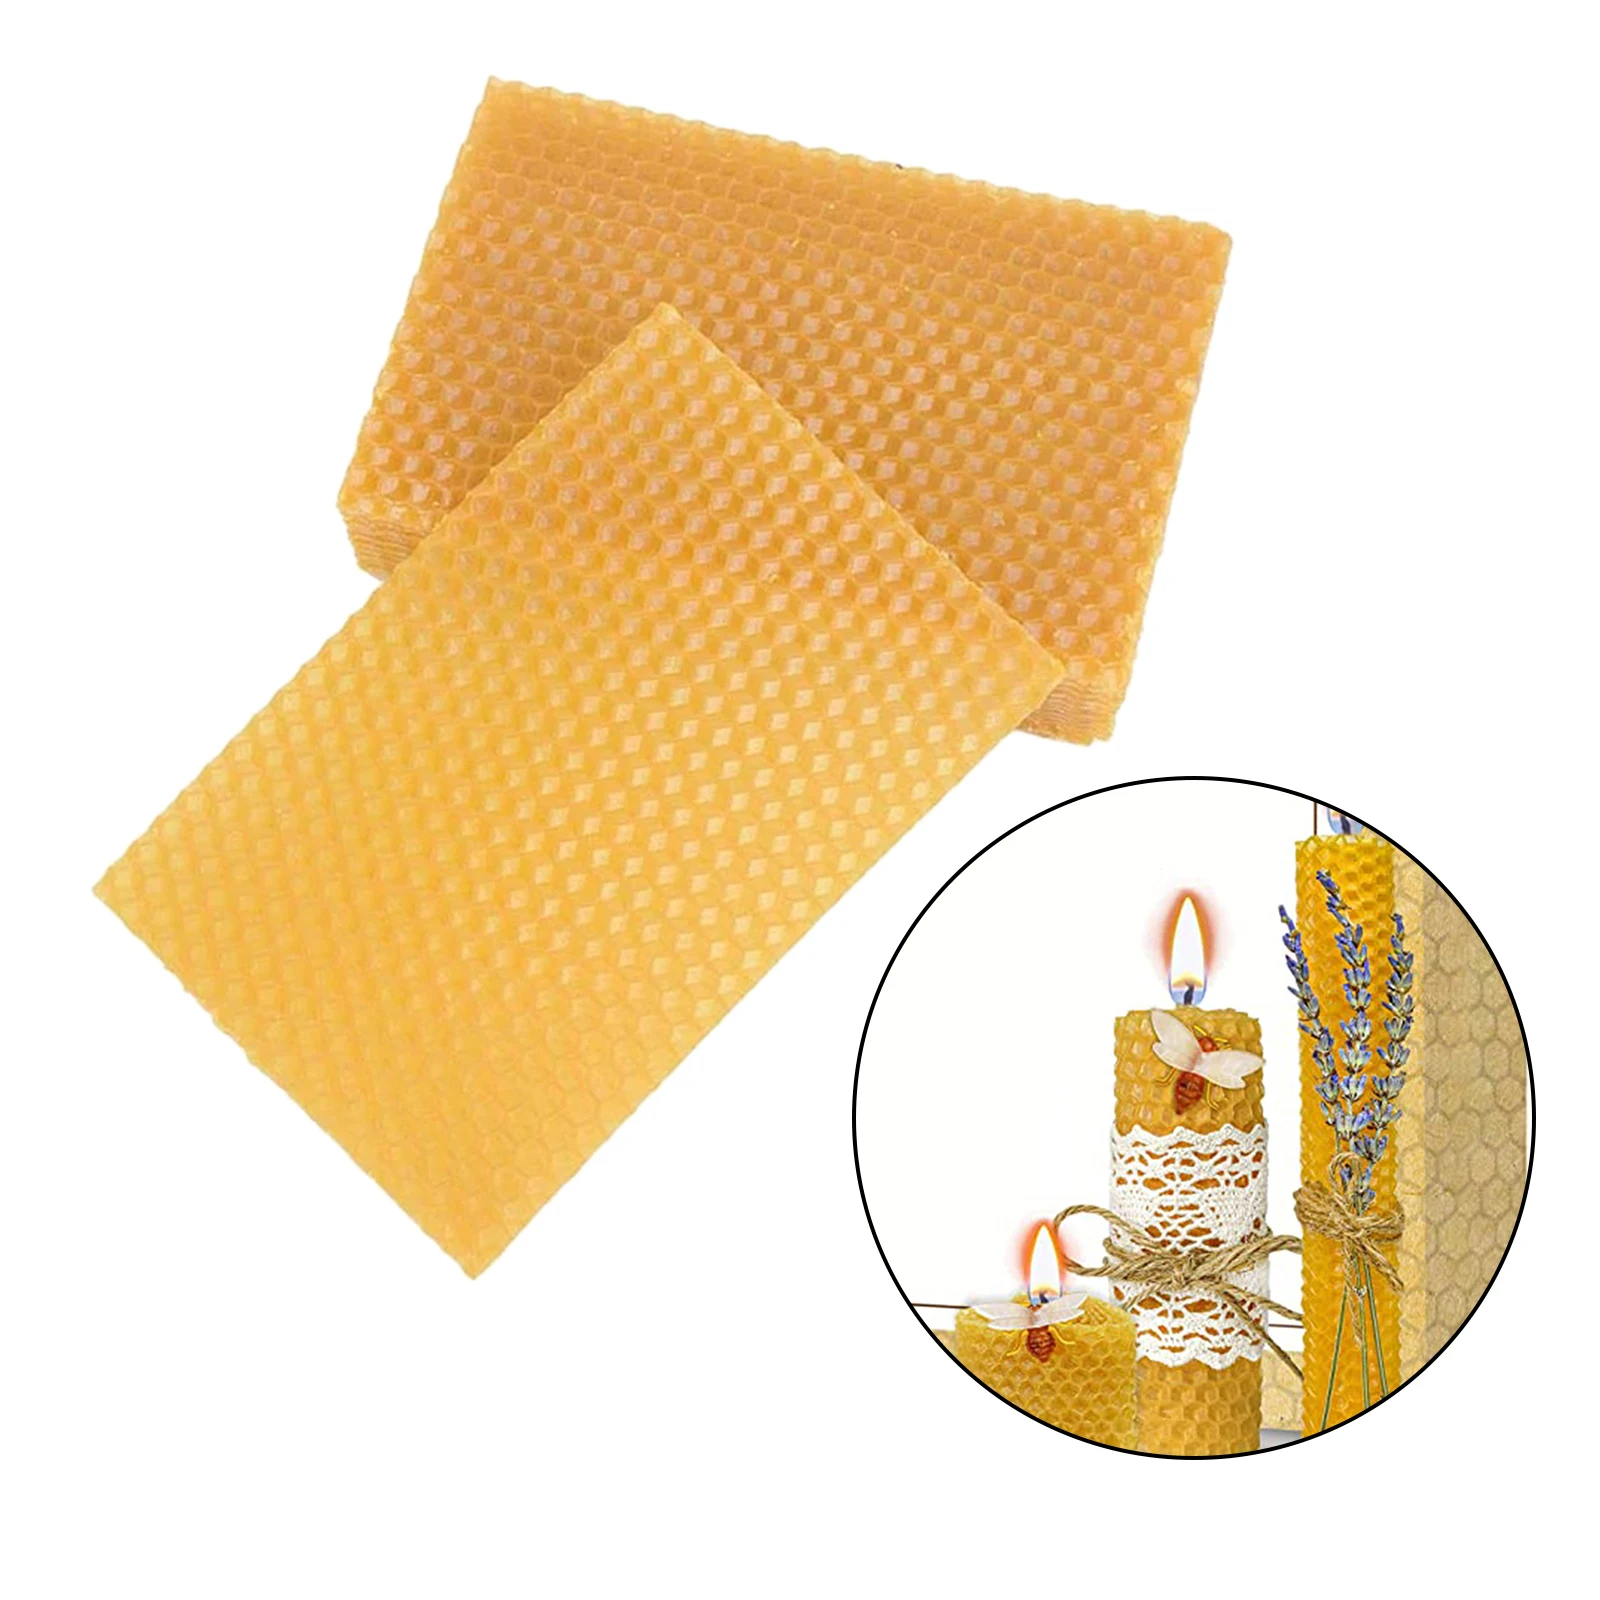 10Sheets Beeswax foundation-Perfect for Candle rolling 100% natural Beeswax Mak 